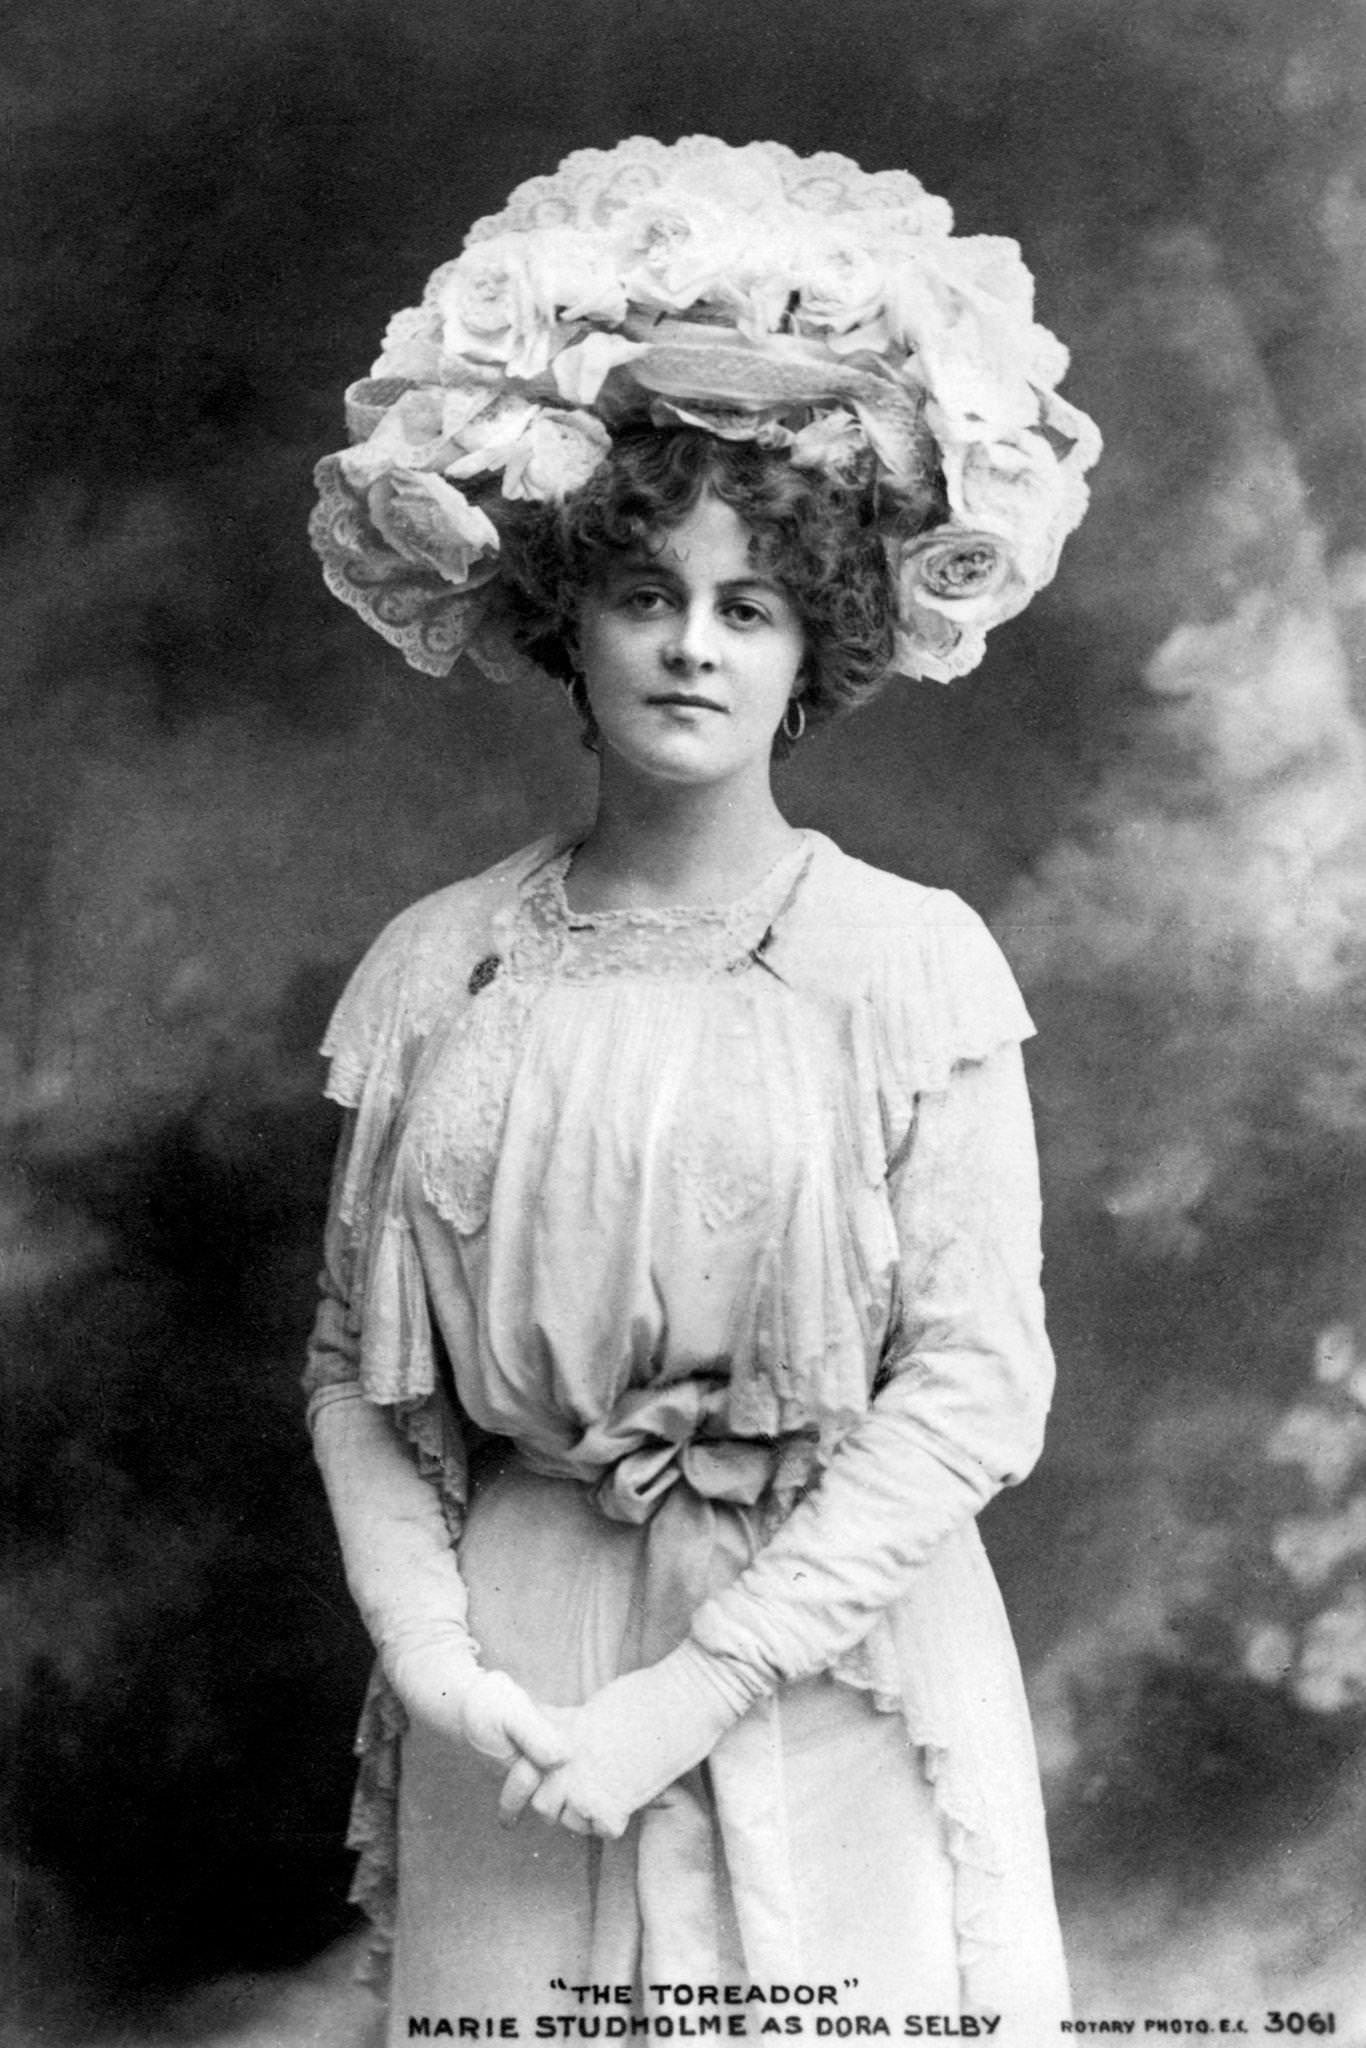 Marie Studholme looks stunning in this portrait from 1905